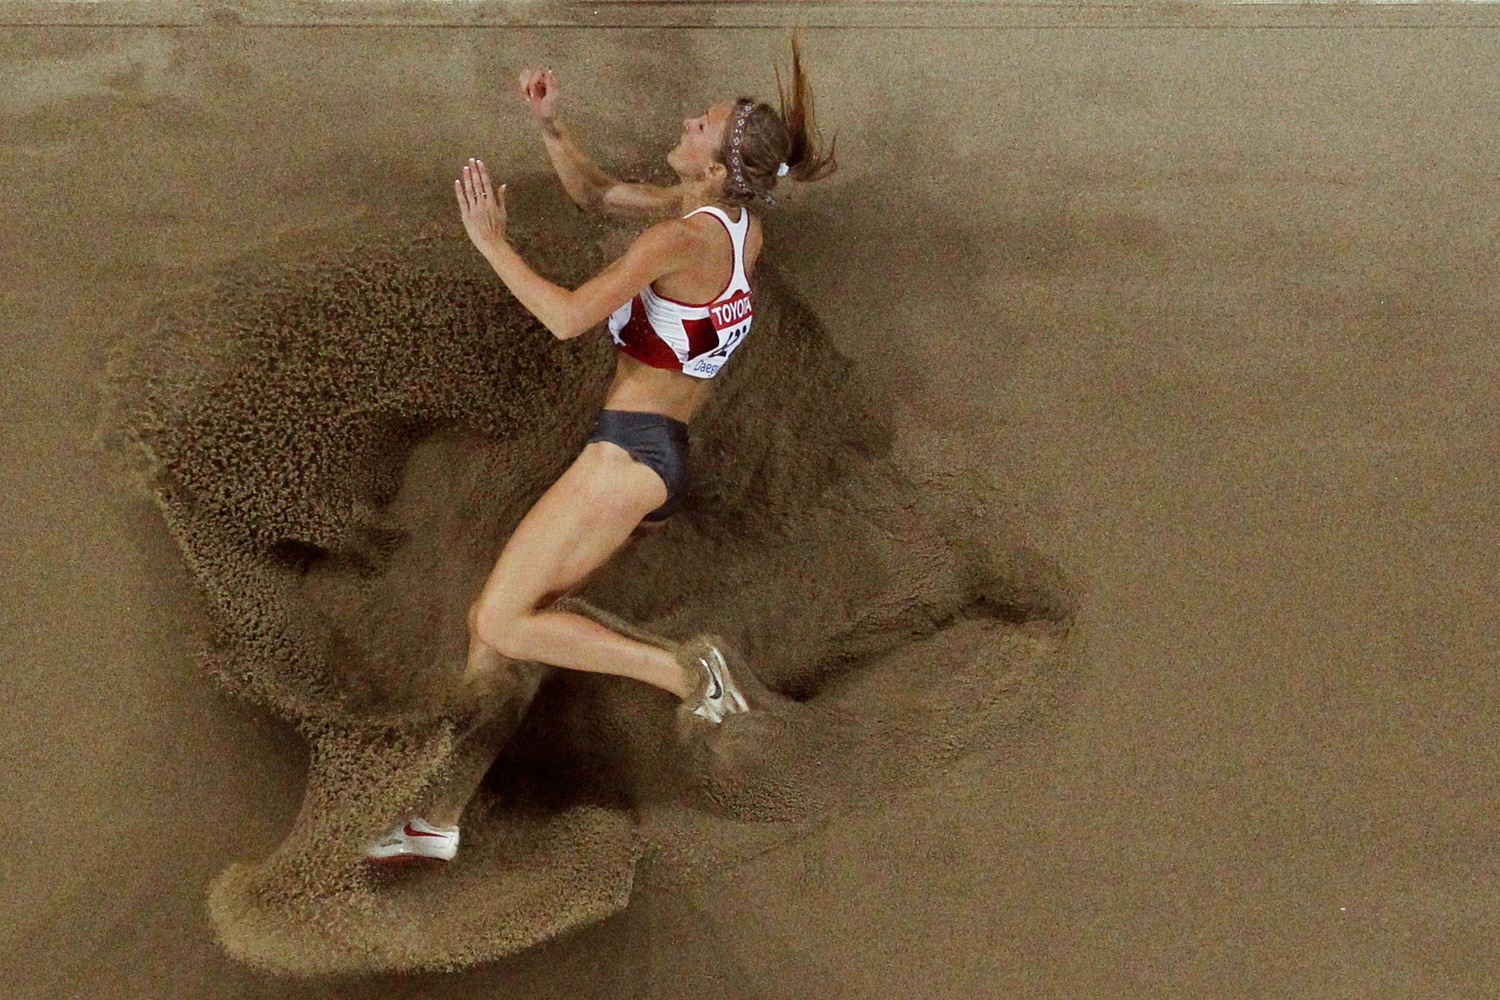 Lauma Griva of Latvia competes during the women's long jump qualifying event at the IAAF World Athletics Championships in Daegu, South Korea, August 27, 2011.